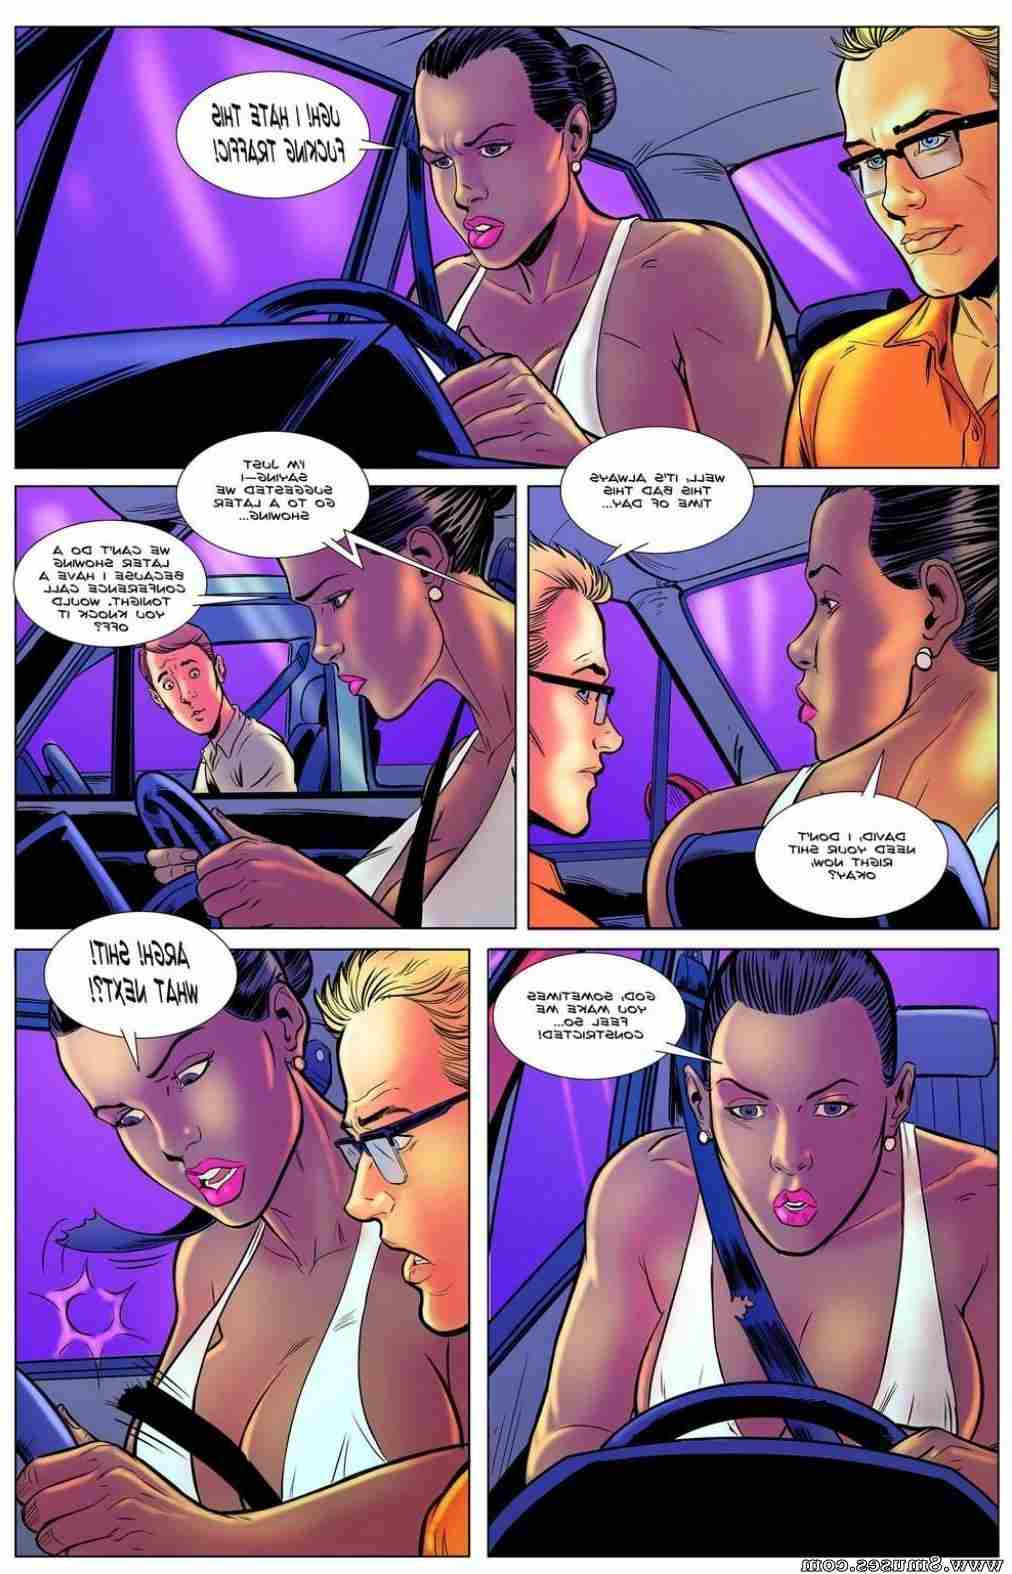 Giantess-Club-Comics/Couples-Therapy Couples_Therapy__8muses_-_Sex_and_Porn_Comics_2.jpg